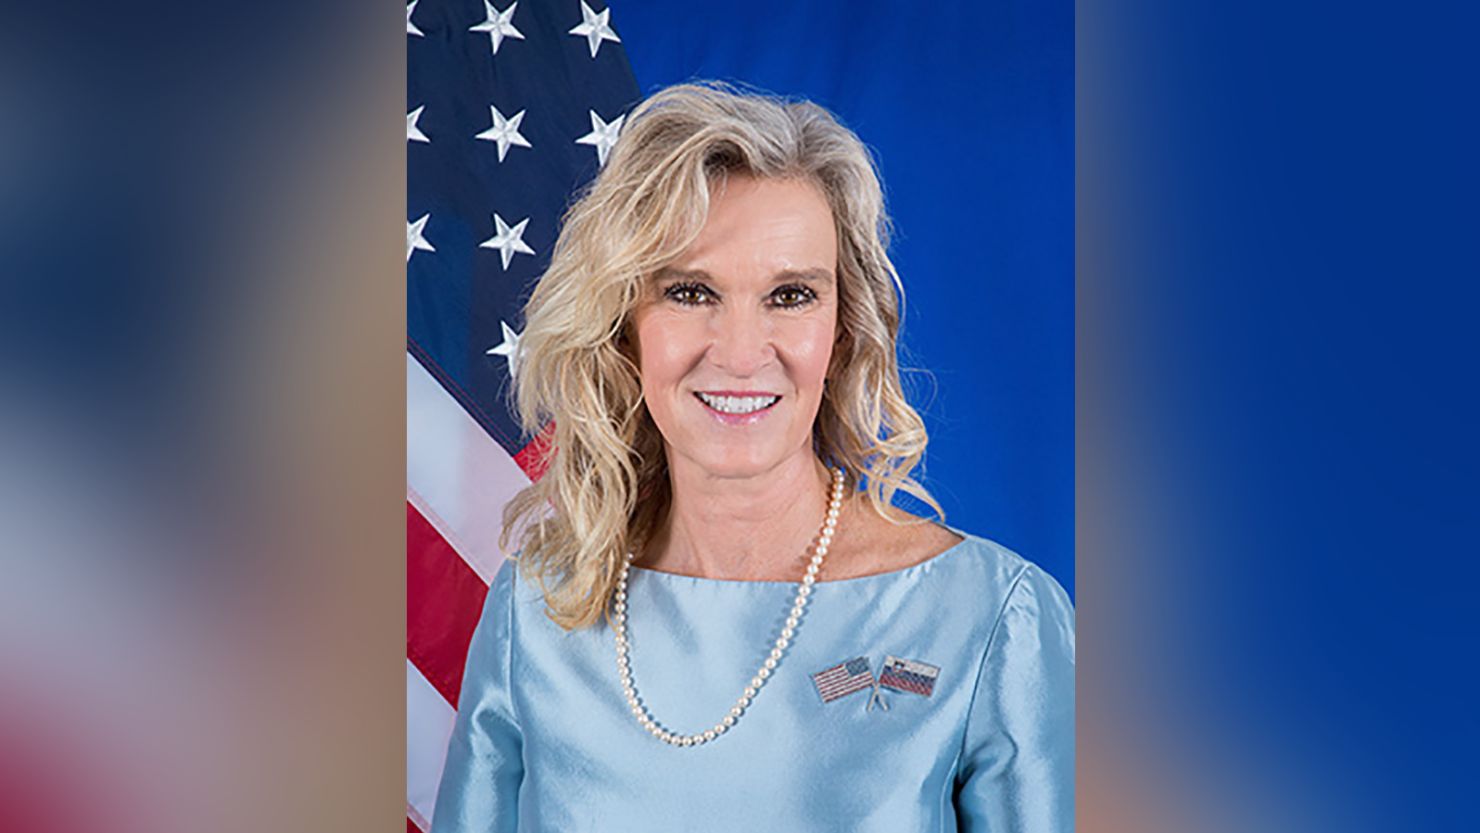 Lynda Blanchard's official photo from when she served as the US Ambassador to Slovenia.